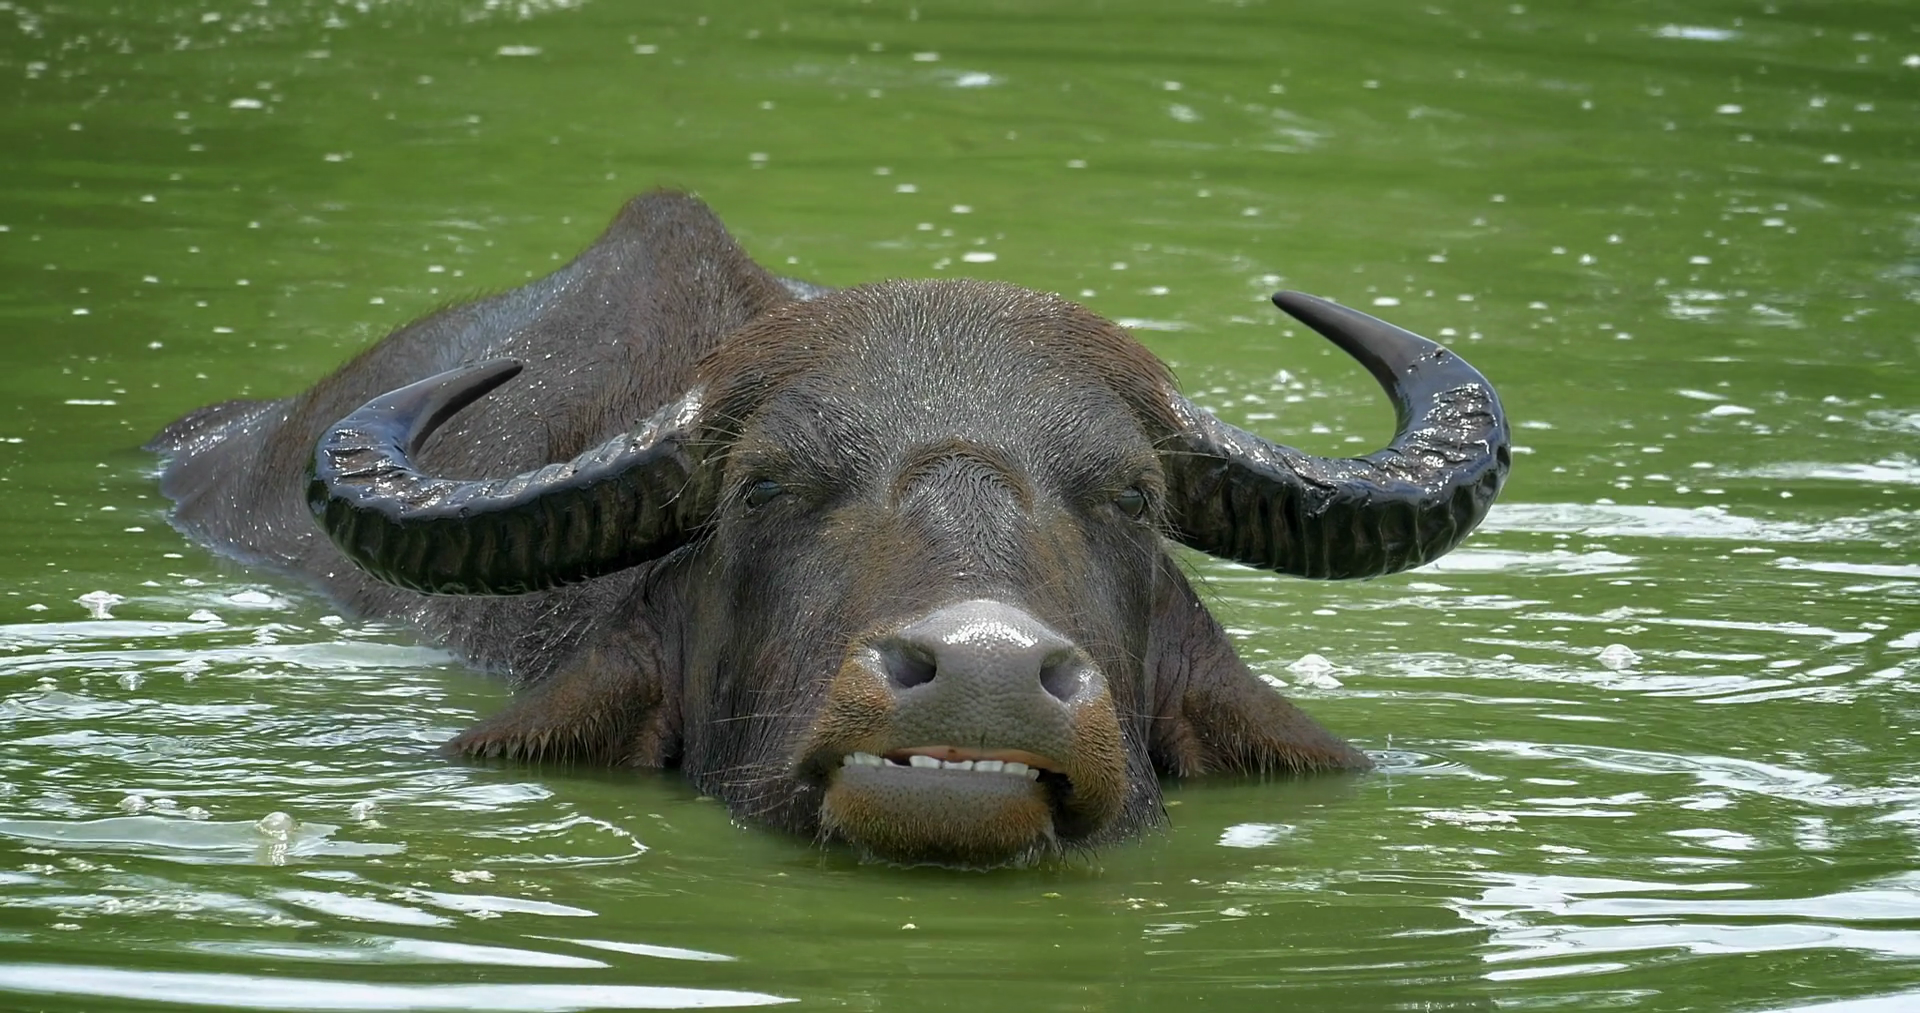 videoblocks-bubalus-bubalis-asian-water-buffalo-bathes-in-muddy-lake-and-dives-under-water-surface-wild-animal-close-up-portrait-view-in-yala-national-park-in-sri-lanka-wildlife-reserve-and-nature-sanctuary_bmmysx15nl_thumbnail-full06.png